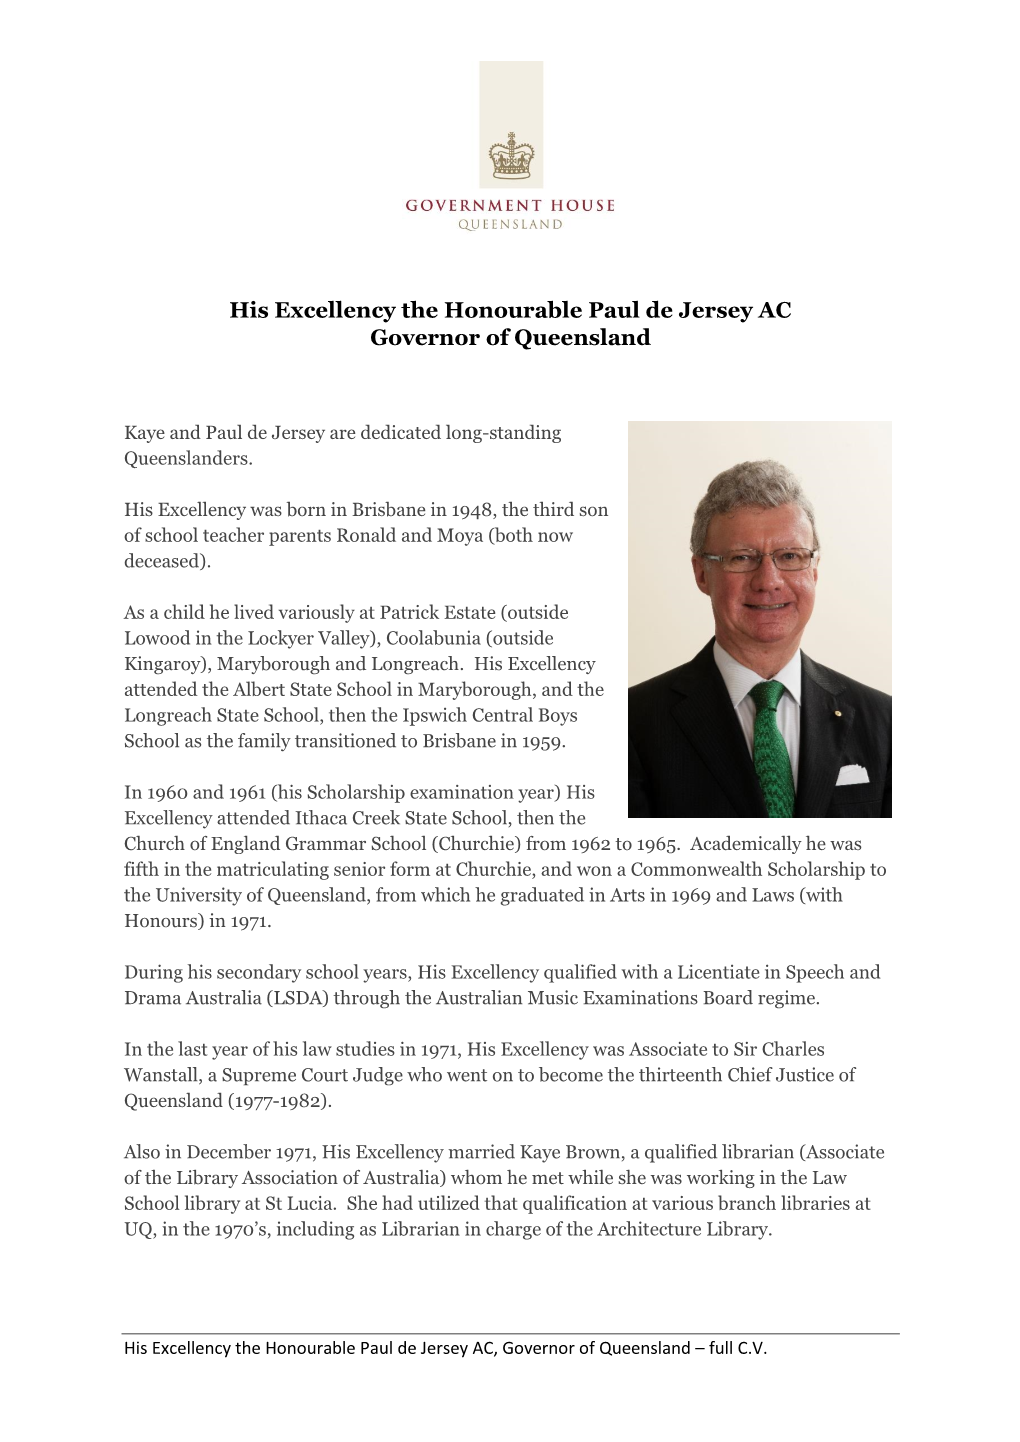 His Excellency the Honourable Paul De Jersey AC Governor of Queensland